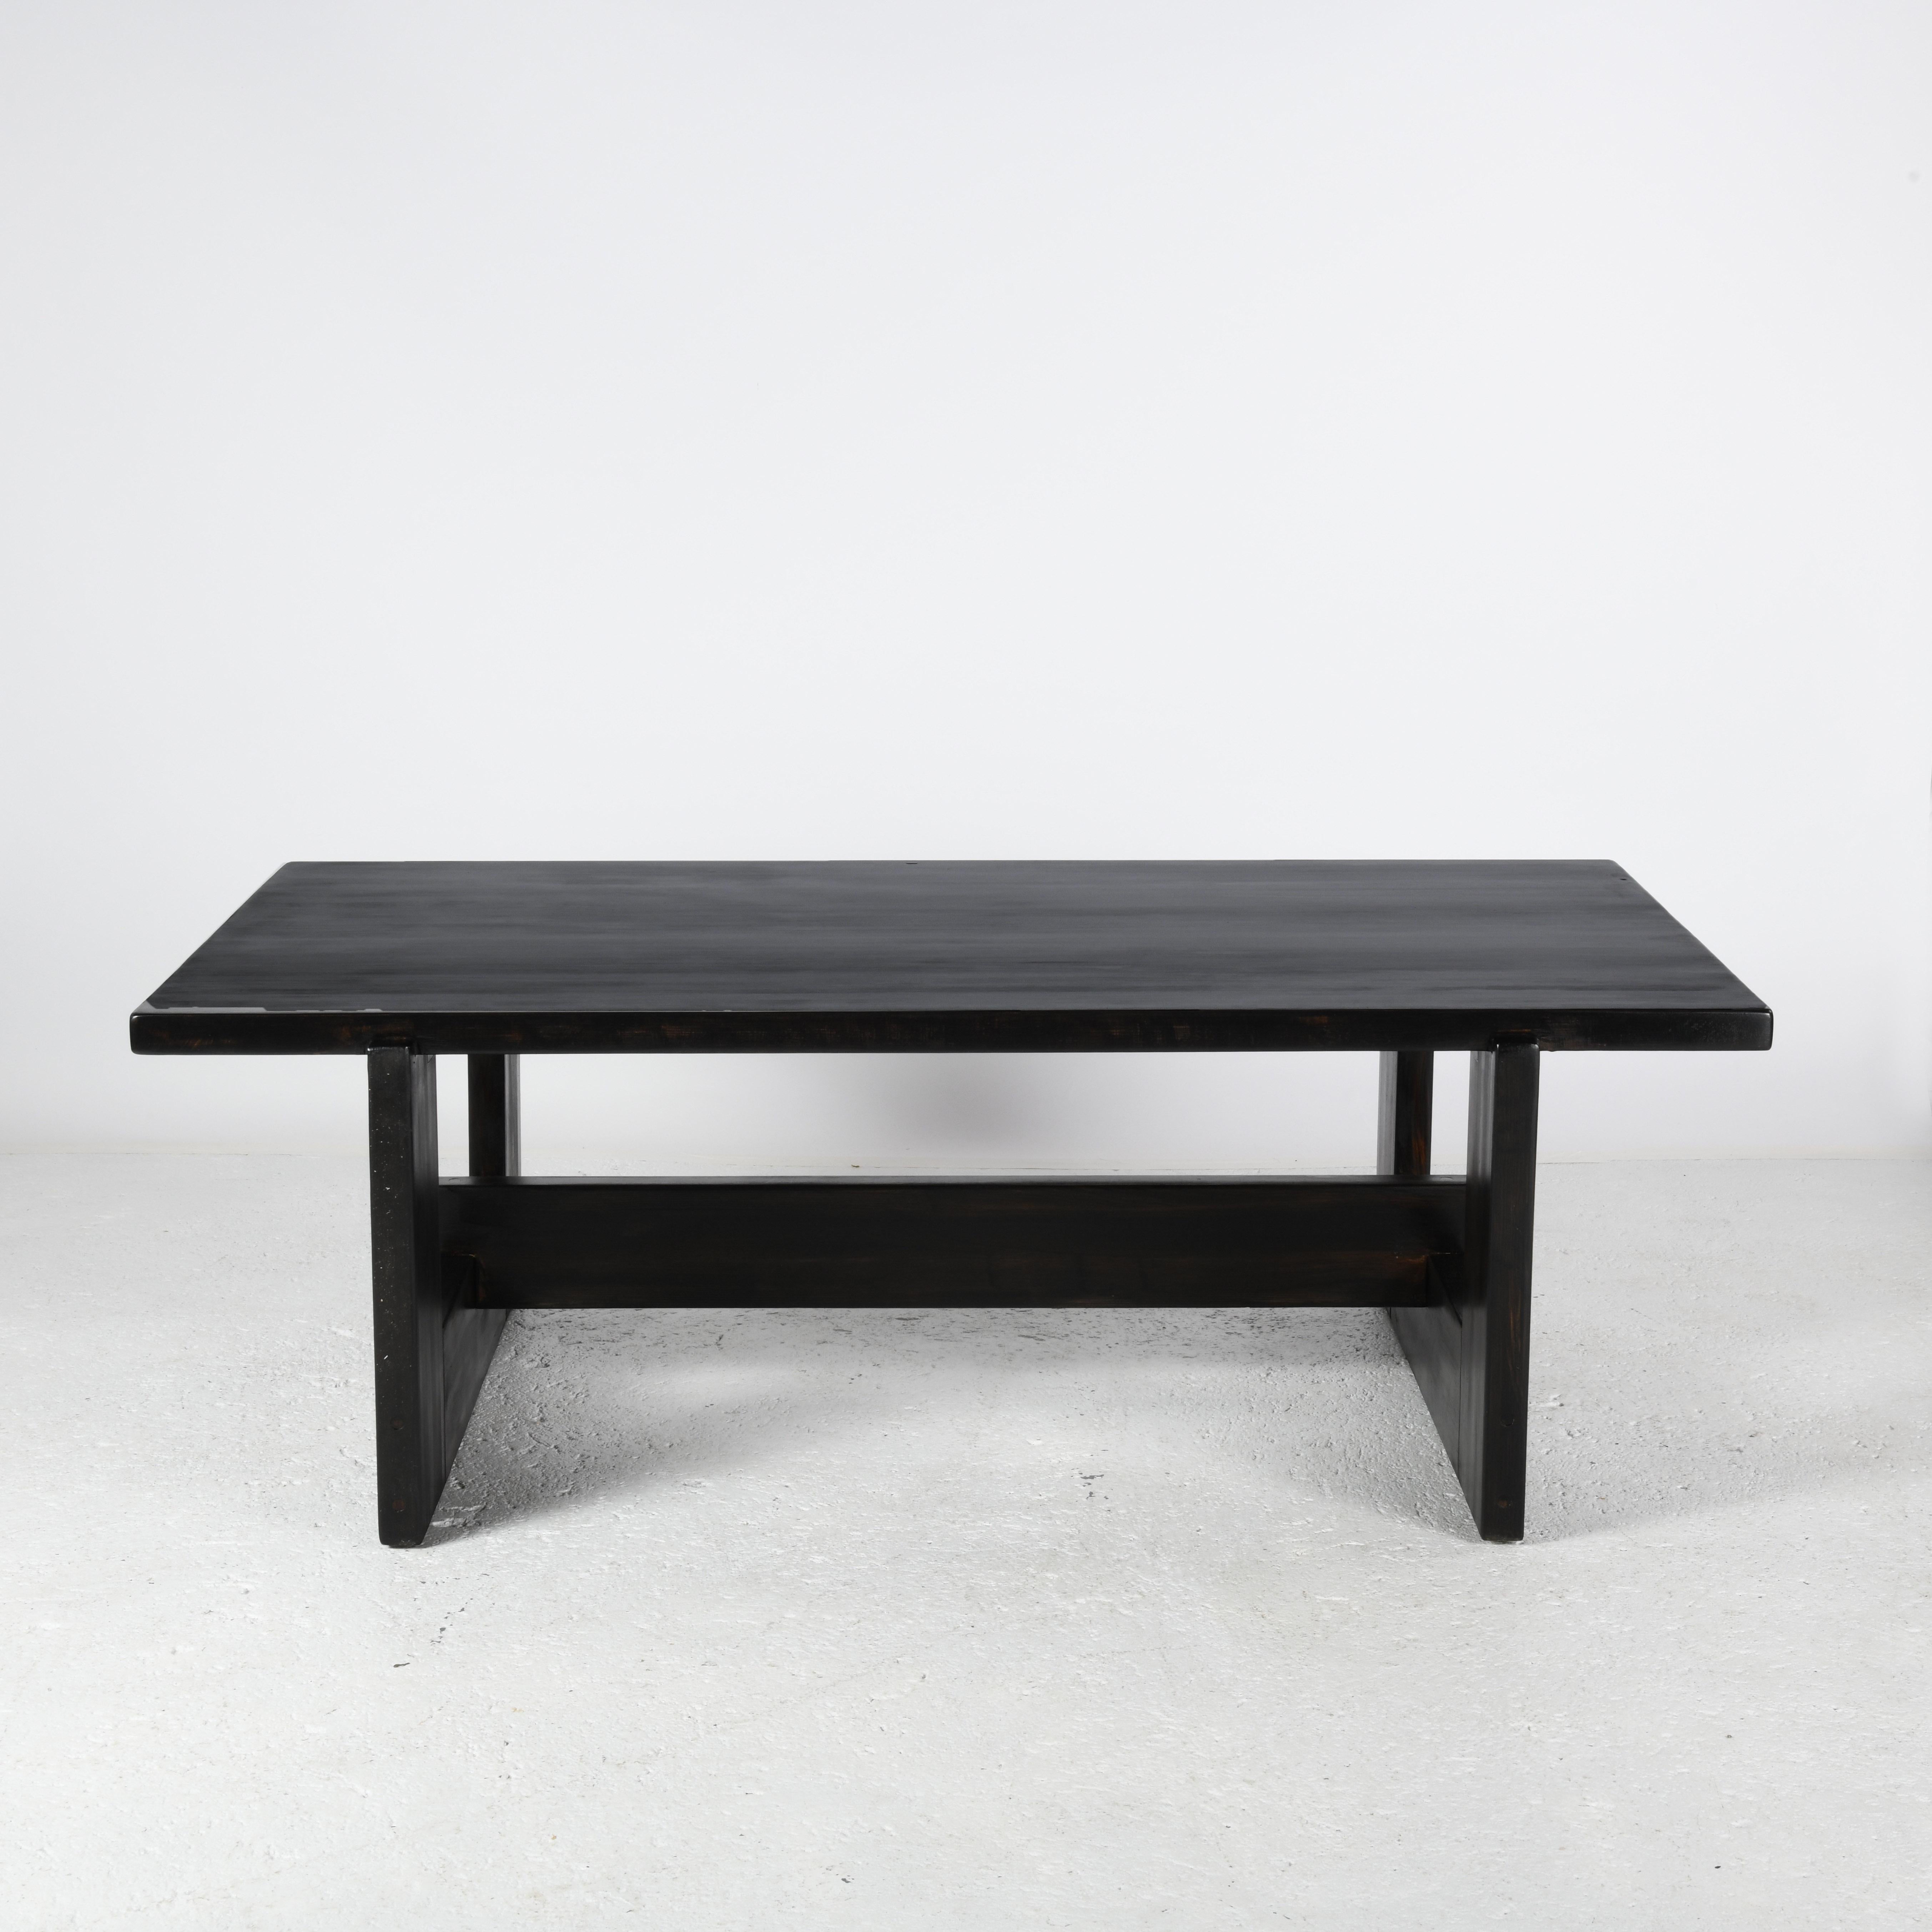 Large coffee table in black-stained solid pine from Denmark. Sober lines and beautifully assembled legs for this massive coffee table. The stain protects the wood while leaving its texture visible. The top is protected by a satin varnish for ease of